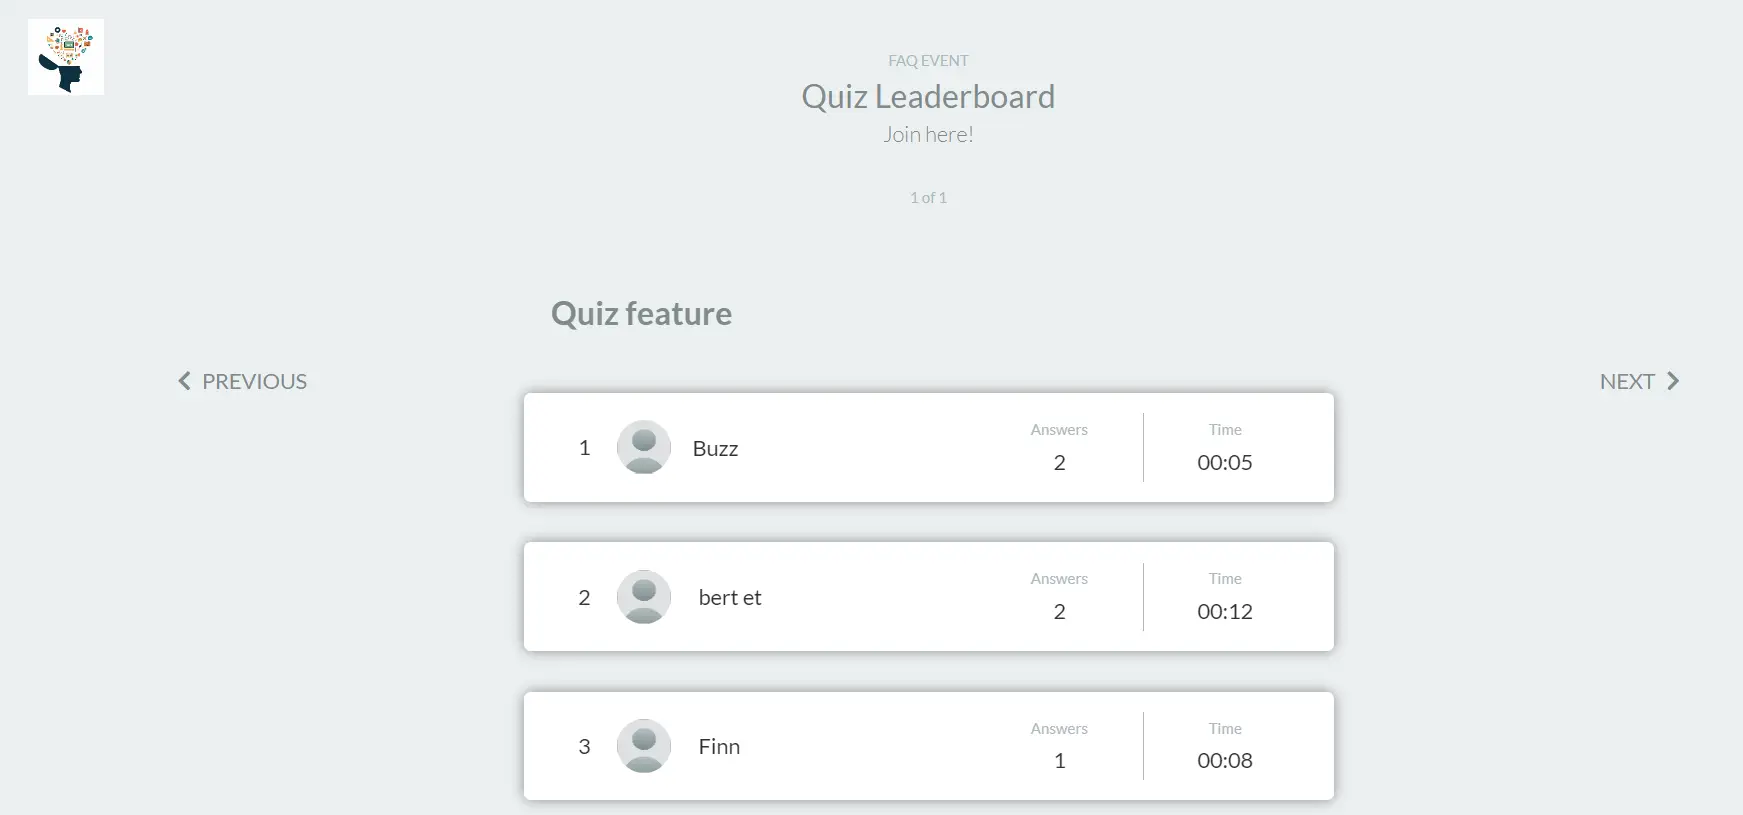 New window showing the Quiz leaderboard